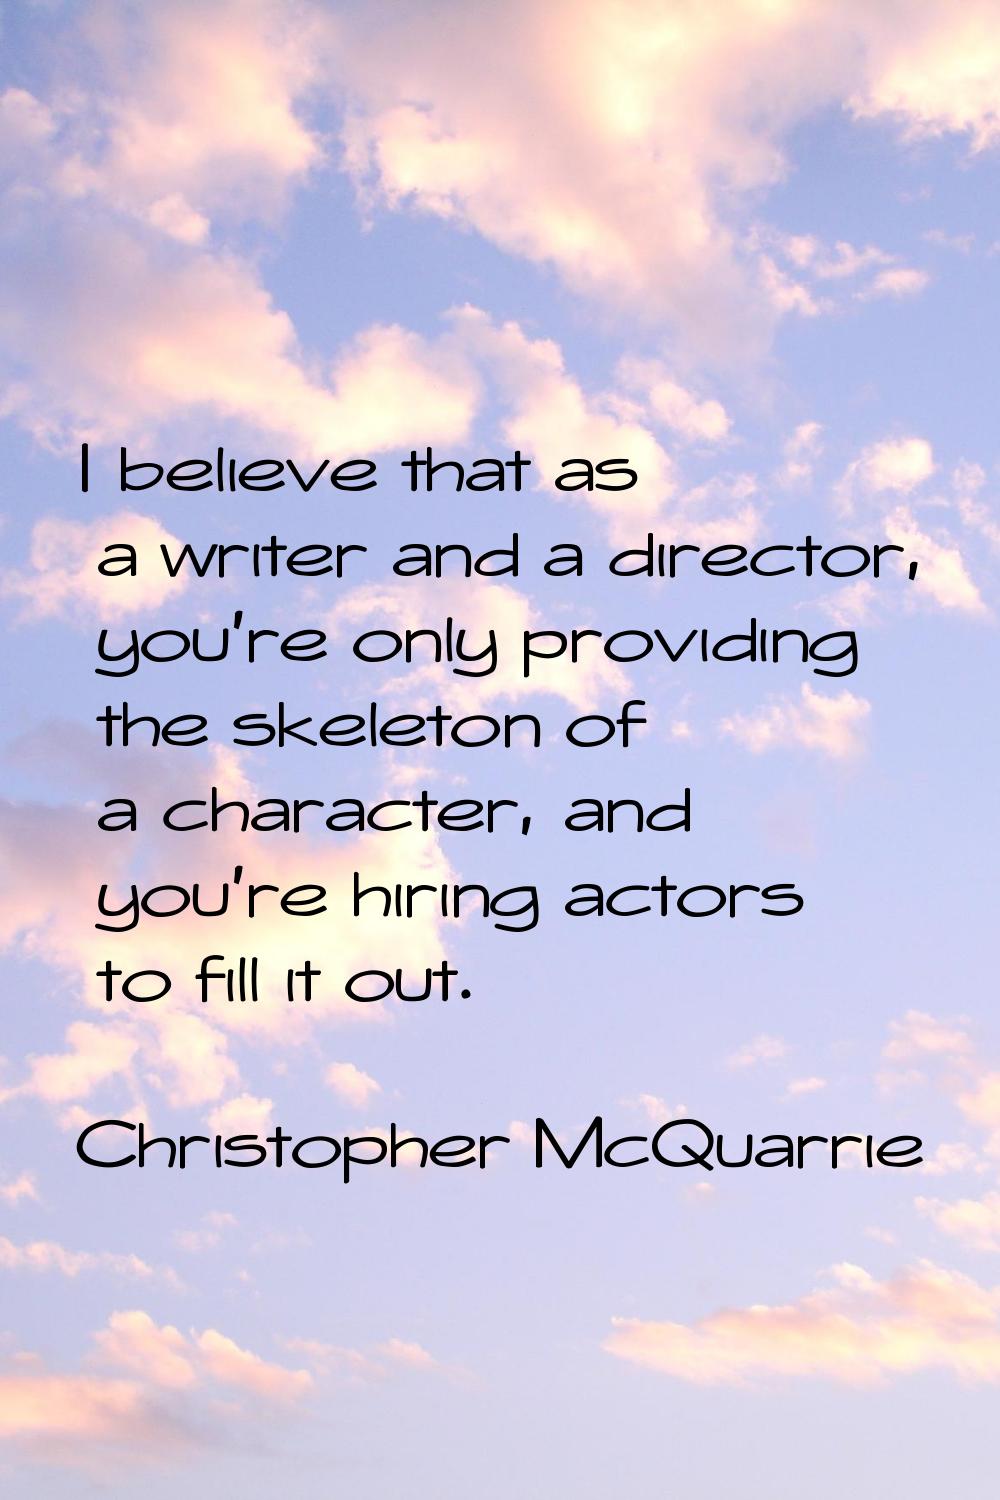 I believe that as a writer and a director, you're only providing the skeleton of a character, and y